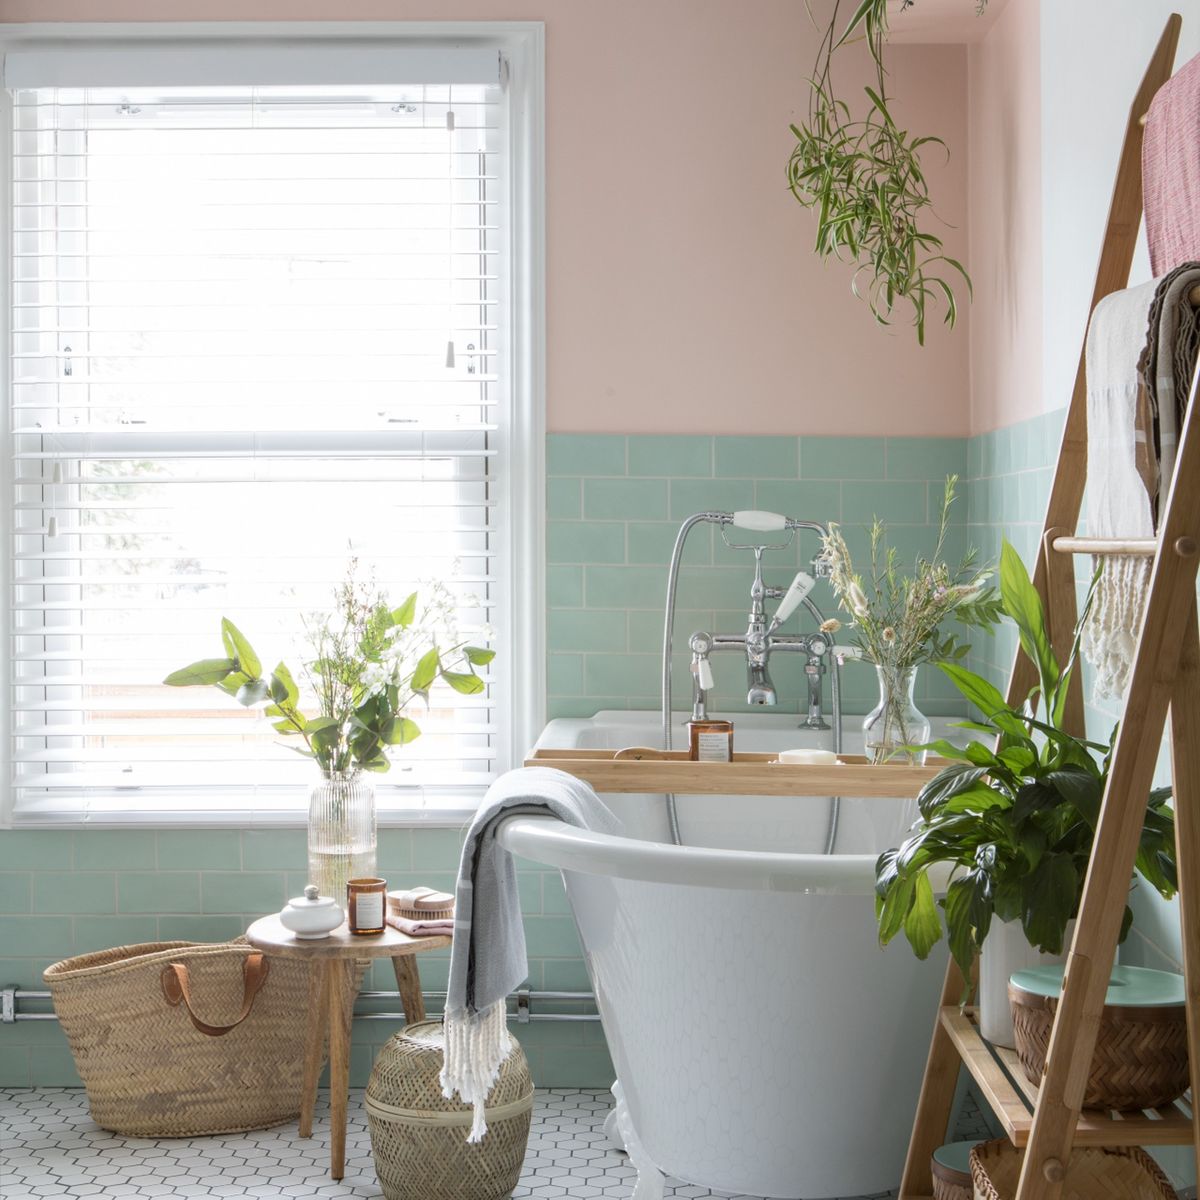 8 bathroom features devaluing homes, according to experts